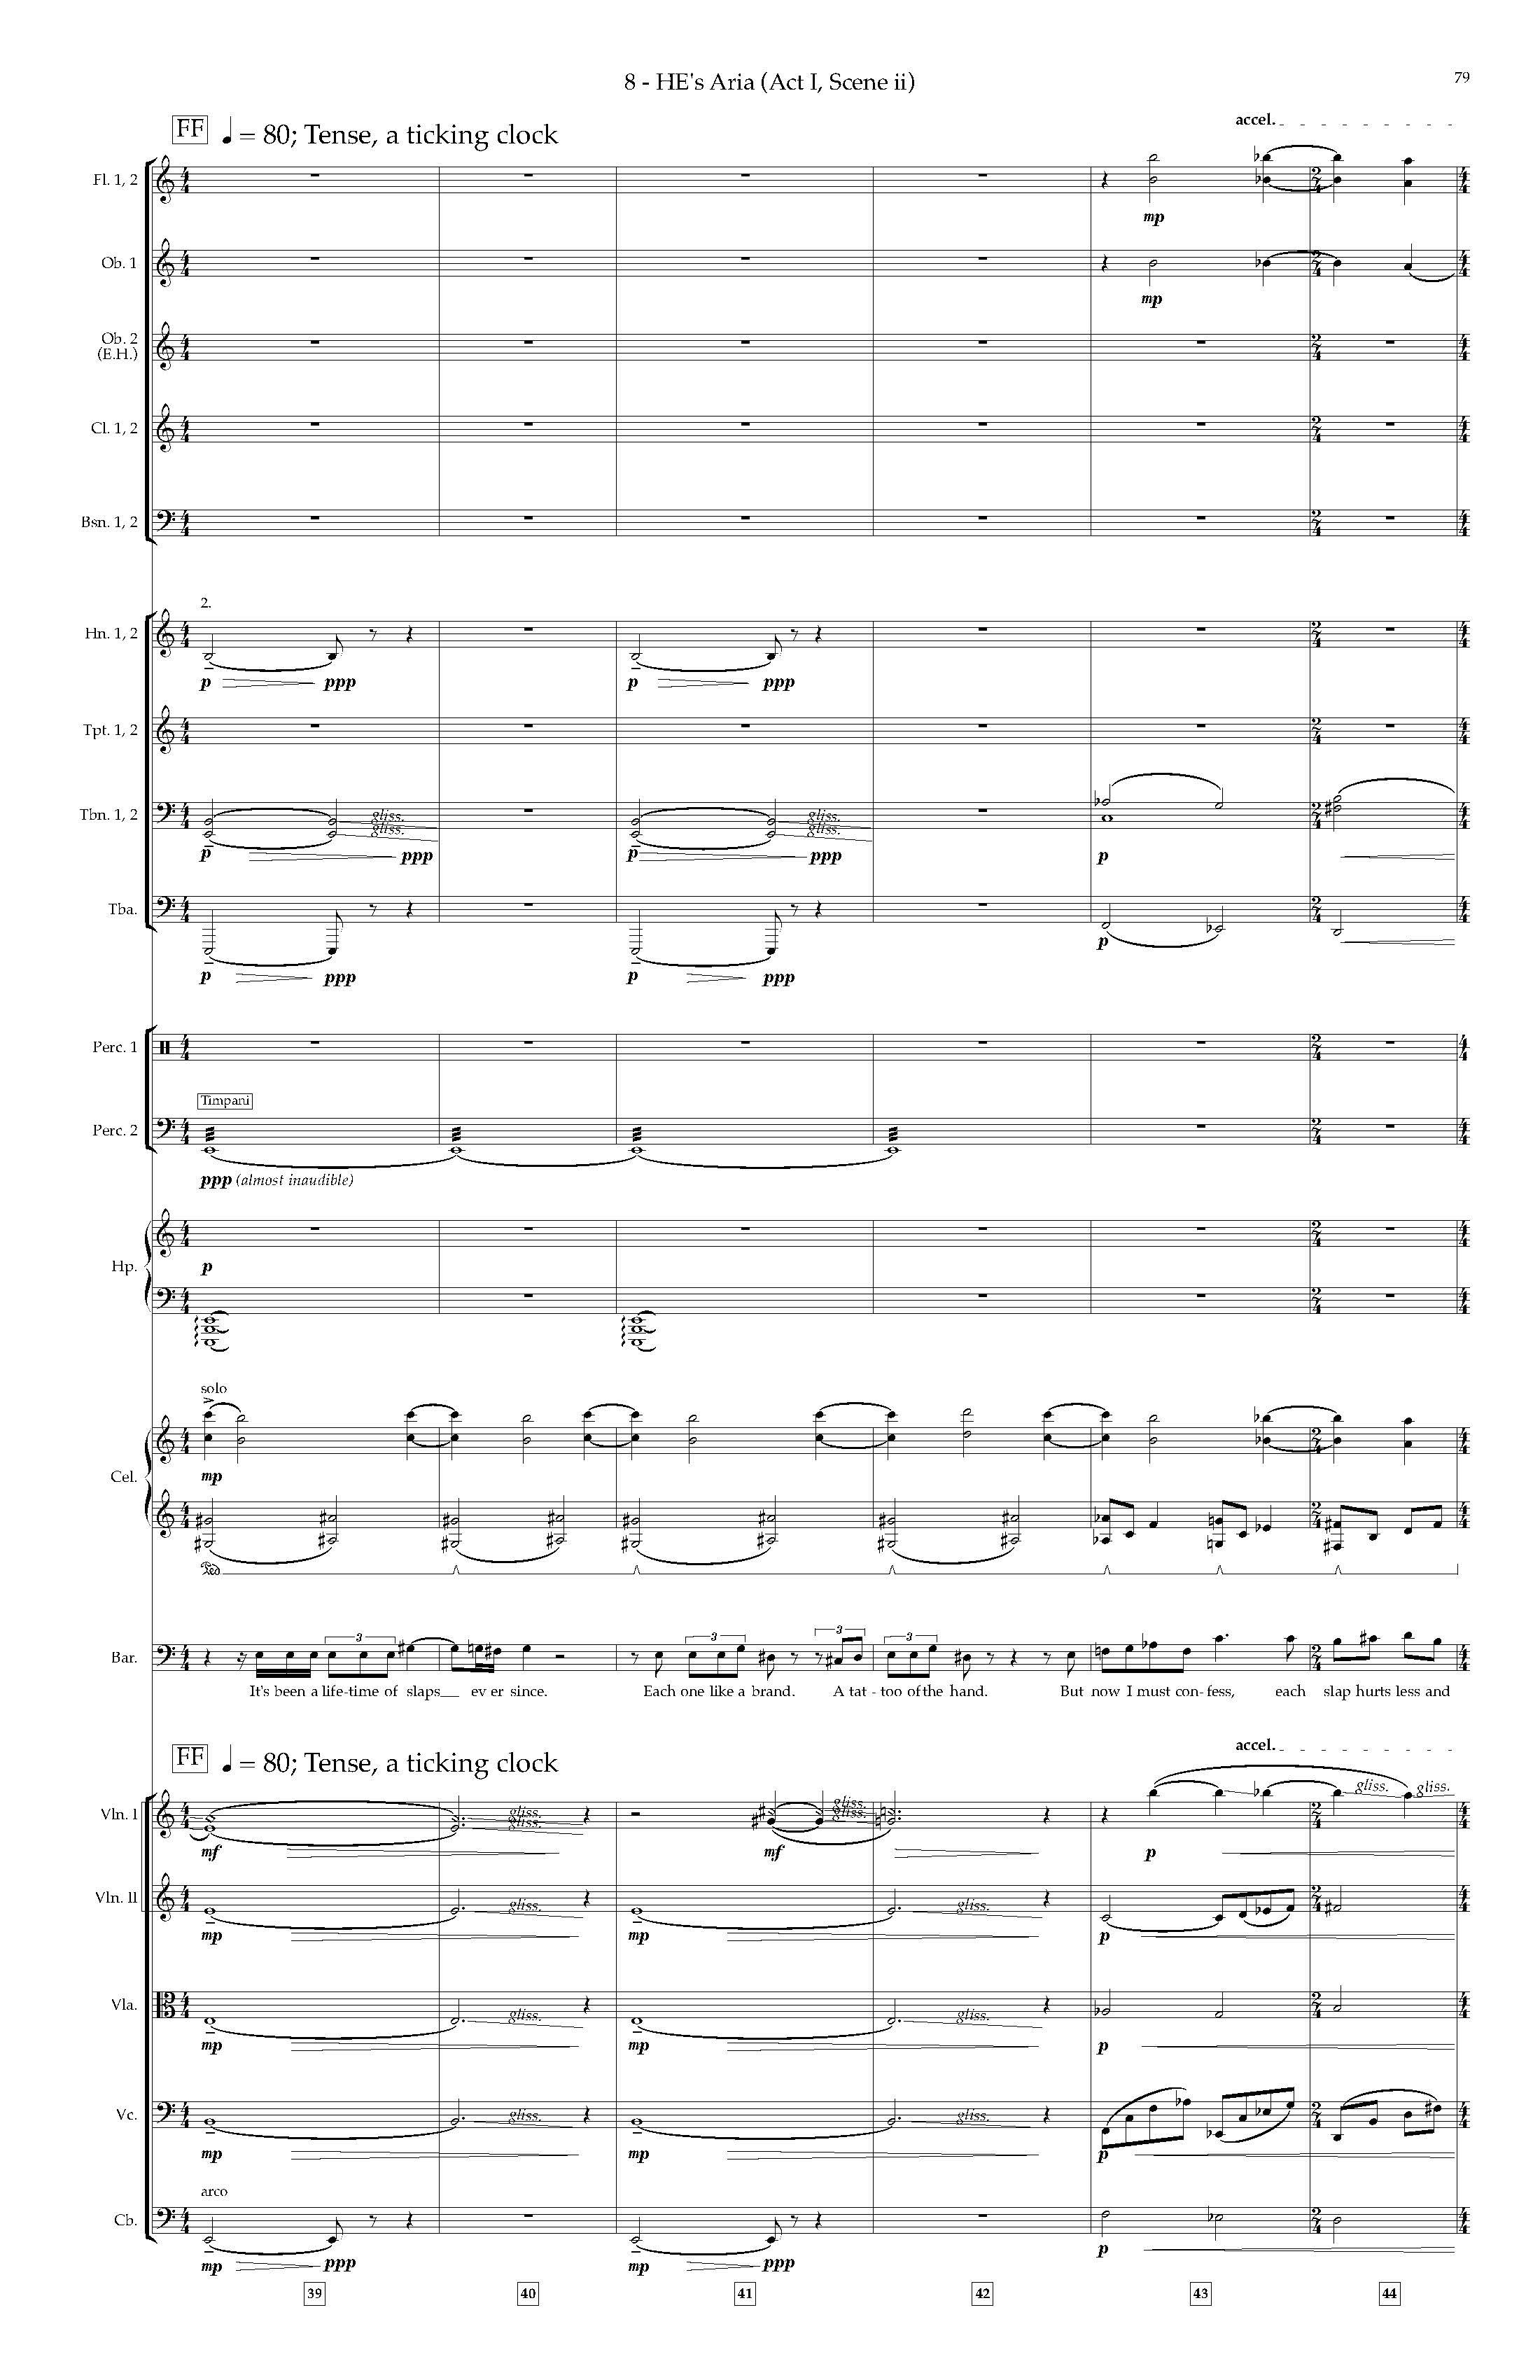 Arias and Interludes from HWGS - Complete Score_Page_85.jpg